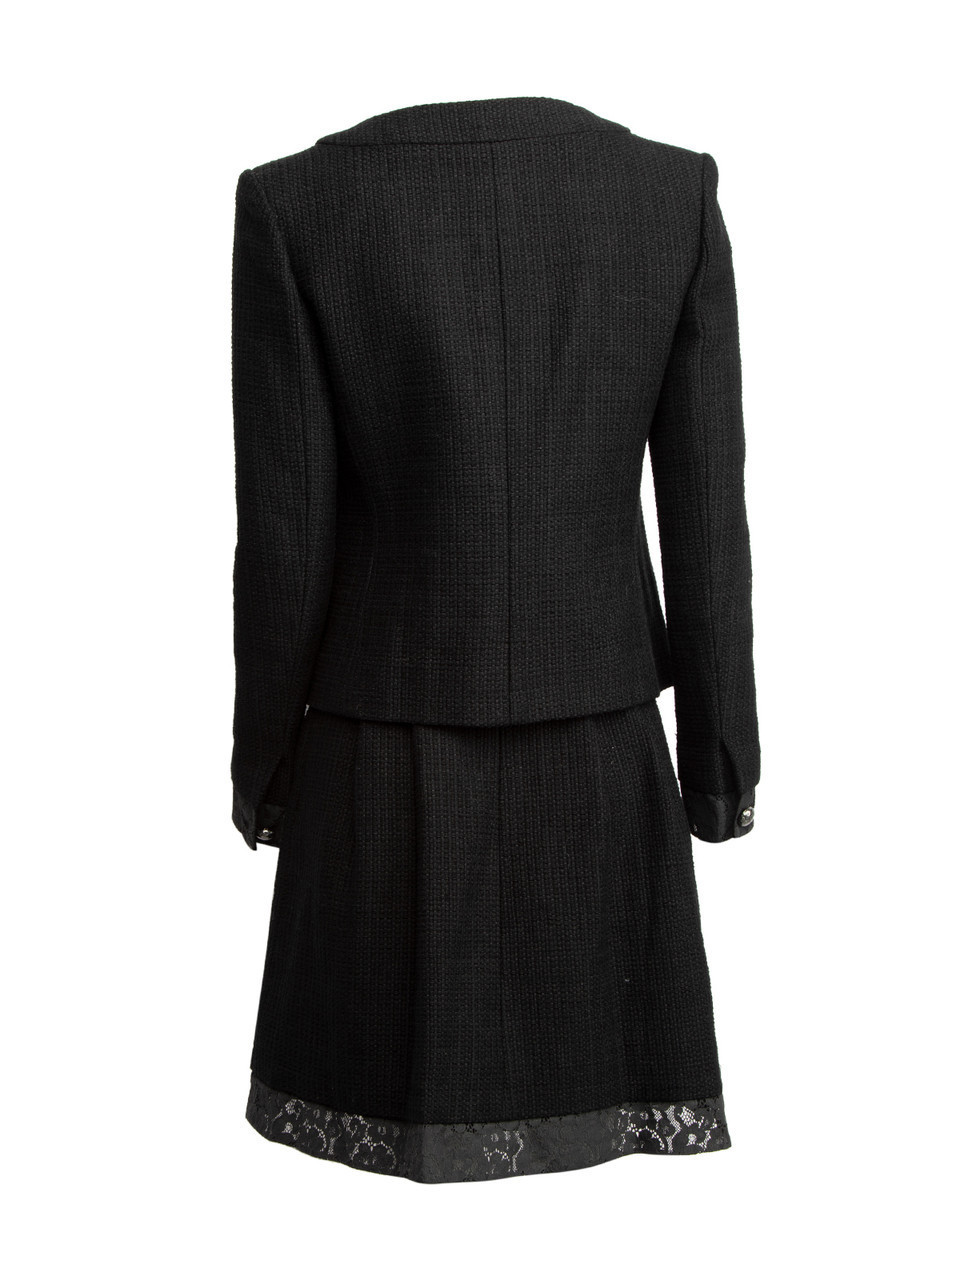 Used Chanel Black Vintage Asymmetric Two-Piece Suit